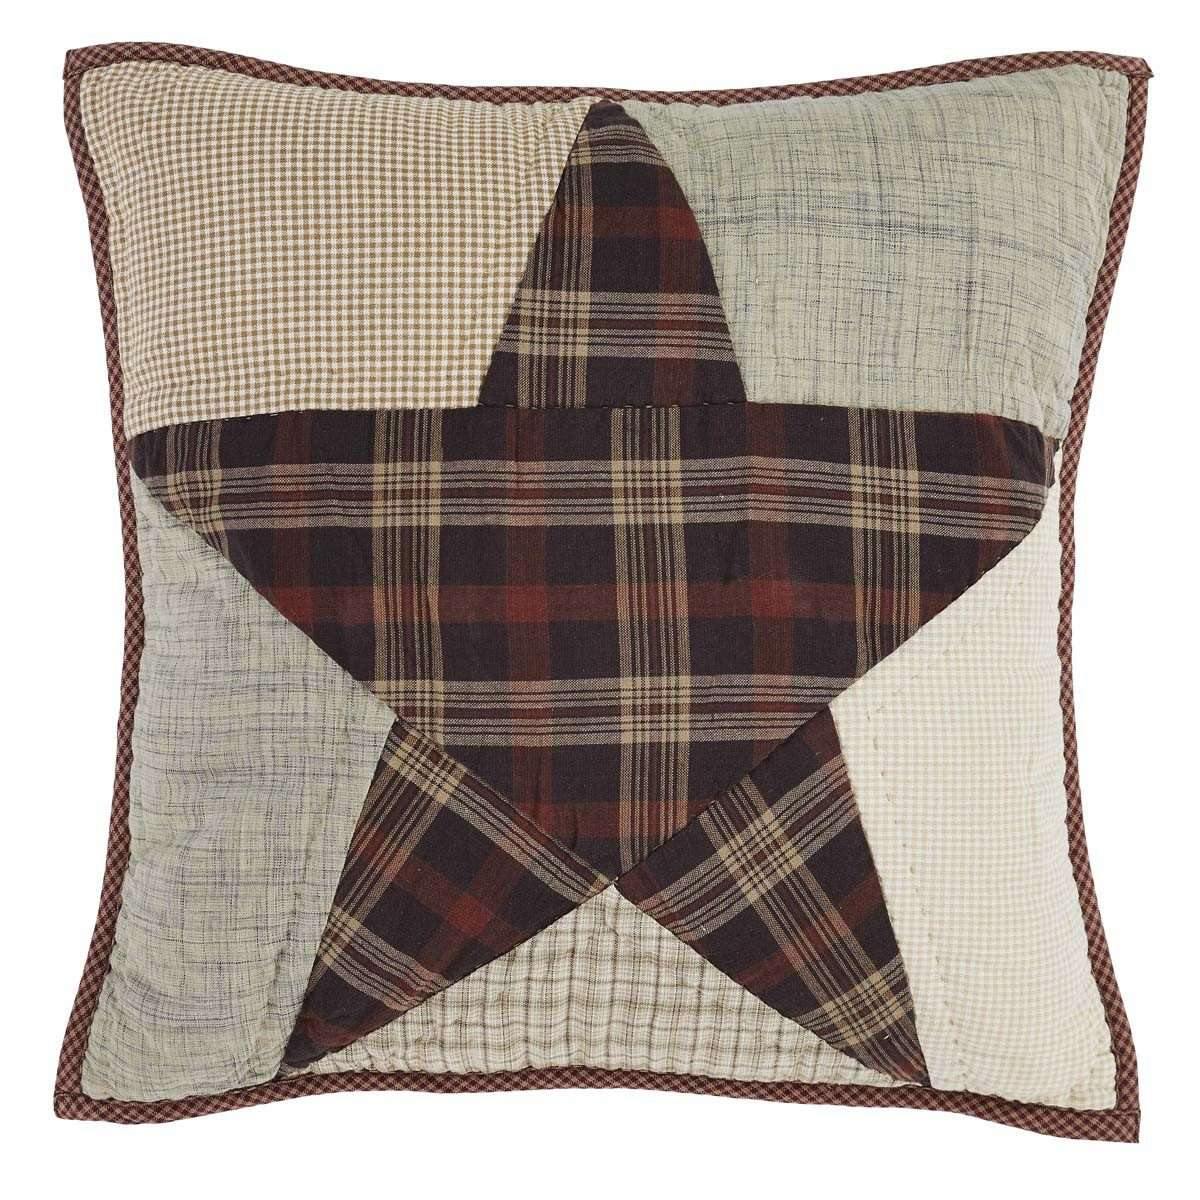 Abilene Star Quilted Pillow 16x16 front